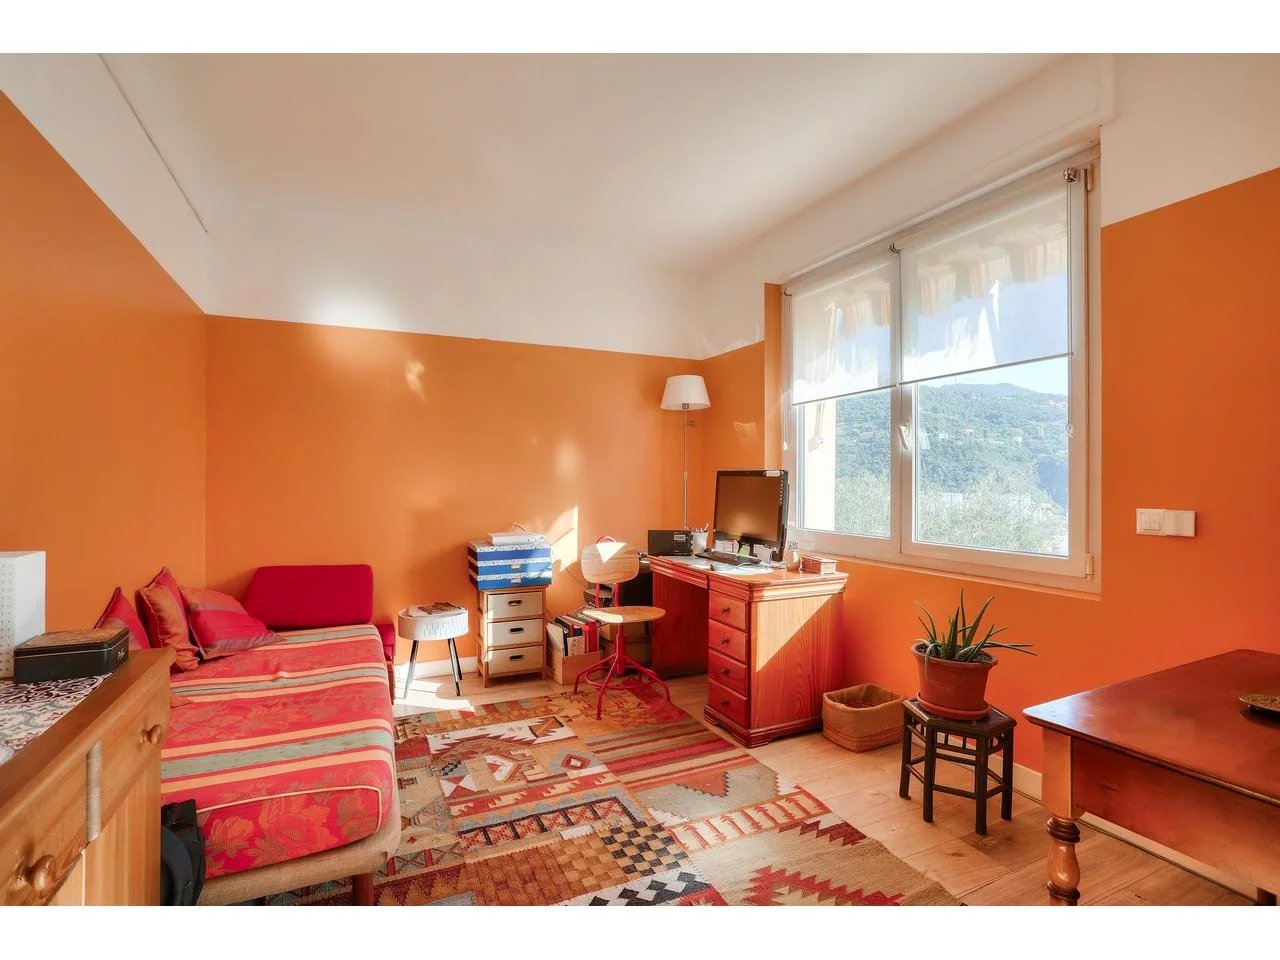 Appartement  4 Rooms 78m2  for sale   429 000 €